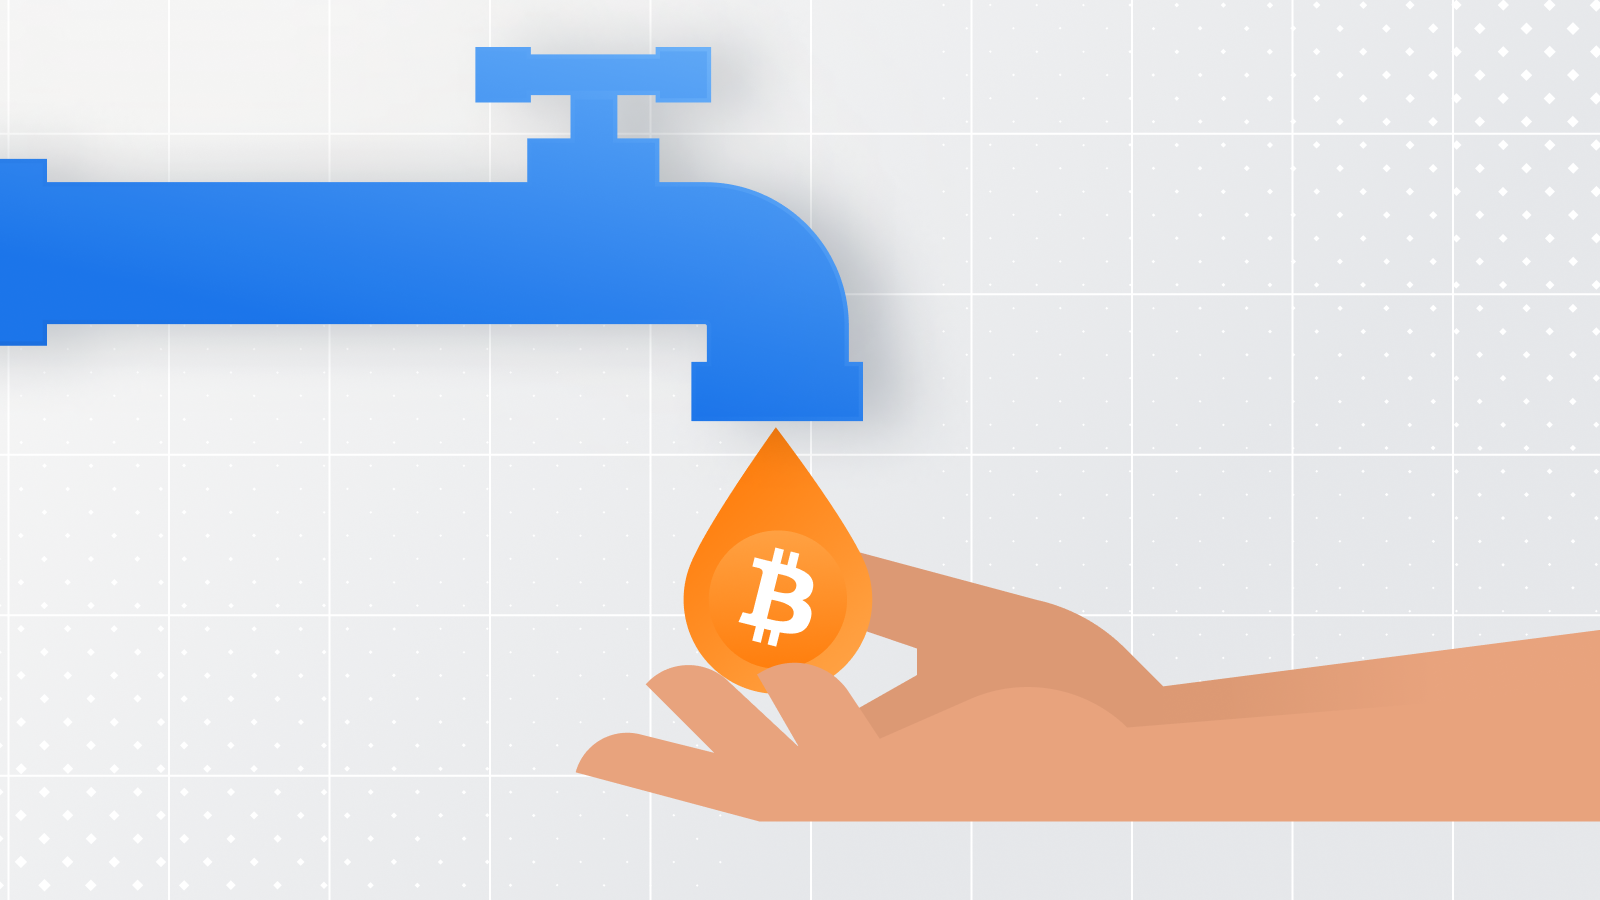 What Do You Need to Create Your Own Crypto Faucet?